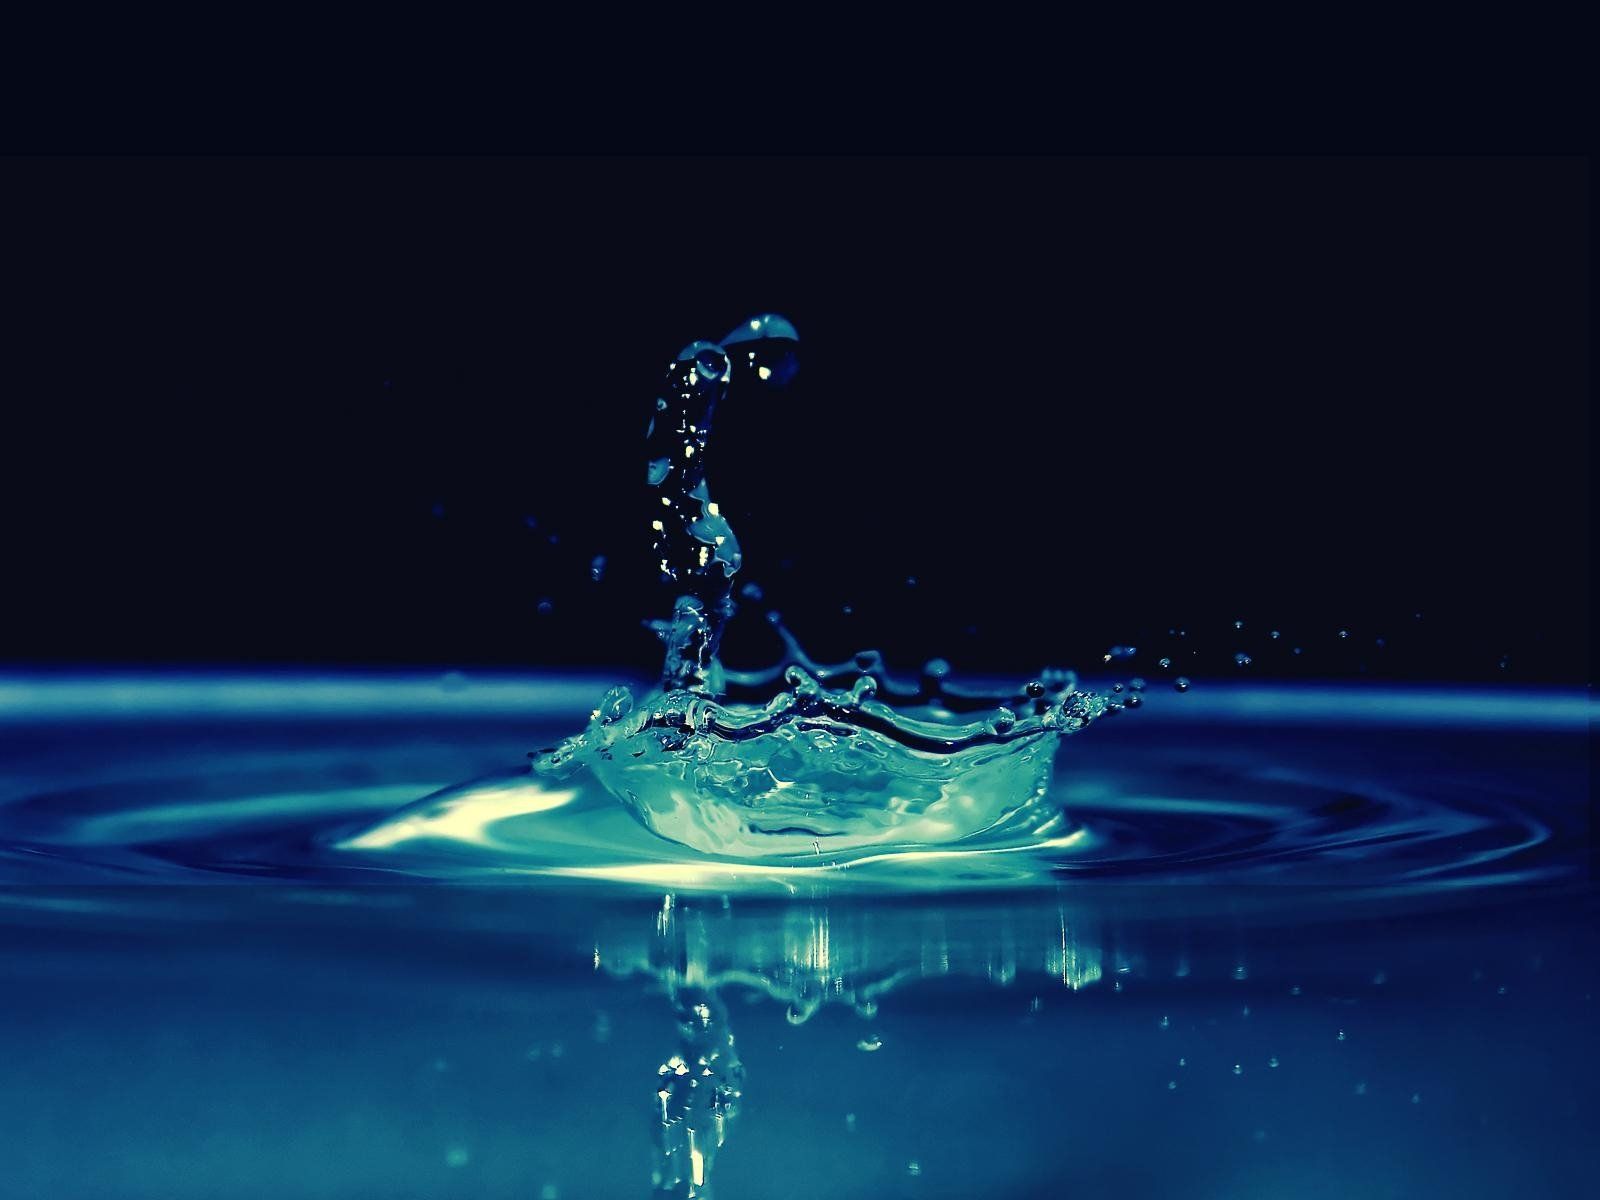 A water droplet is splashing into the surface - Water